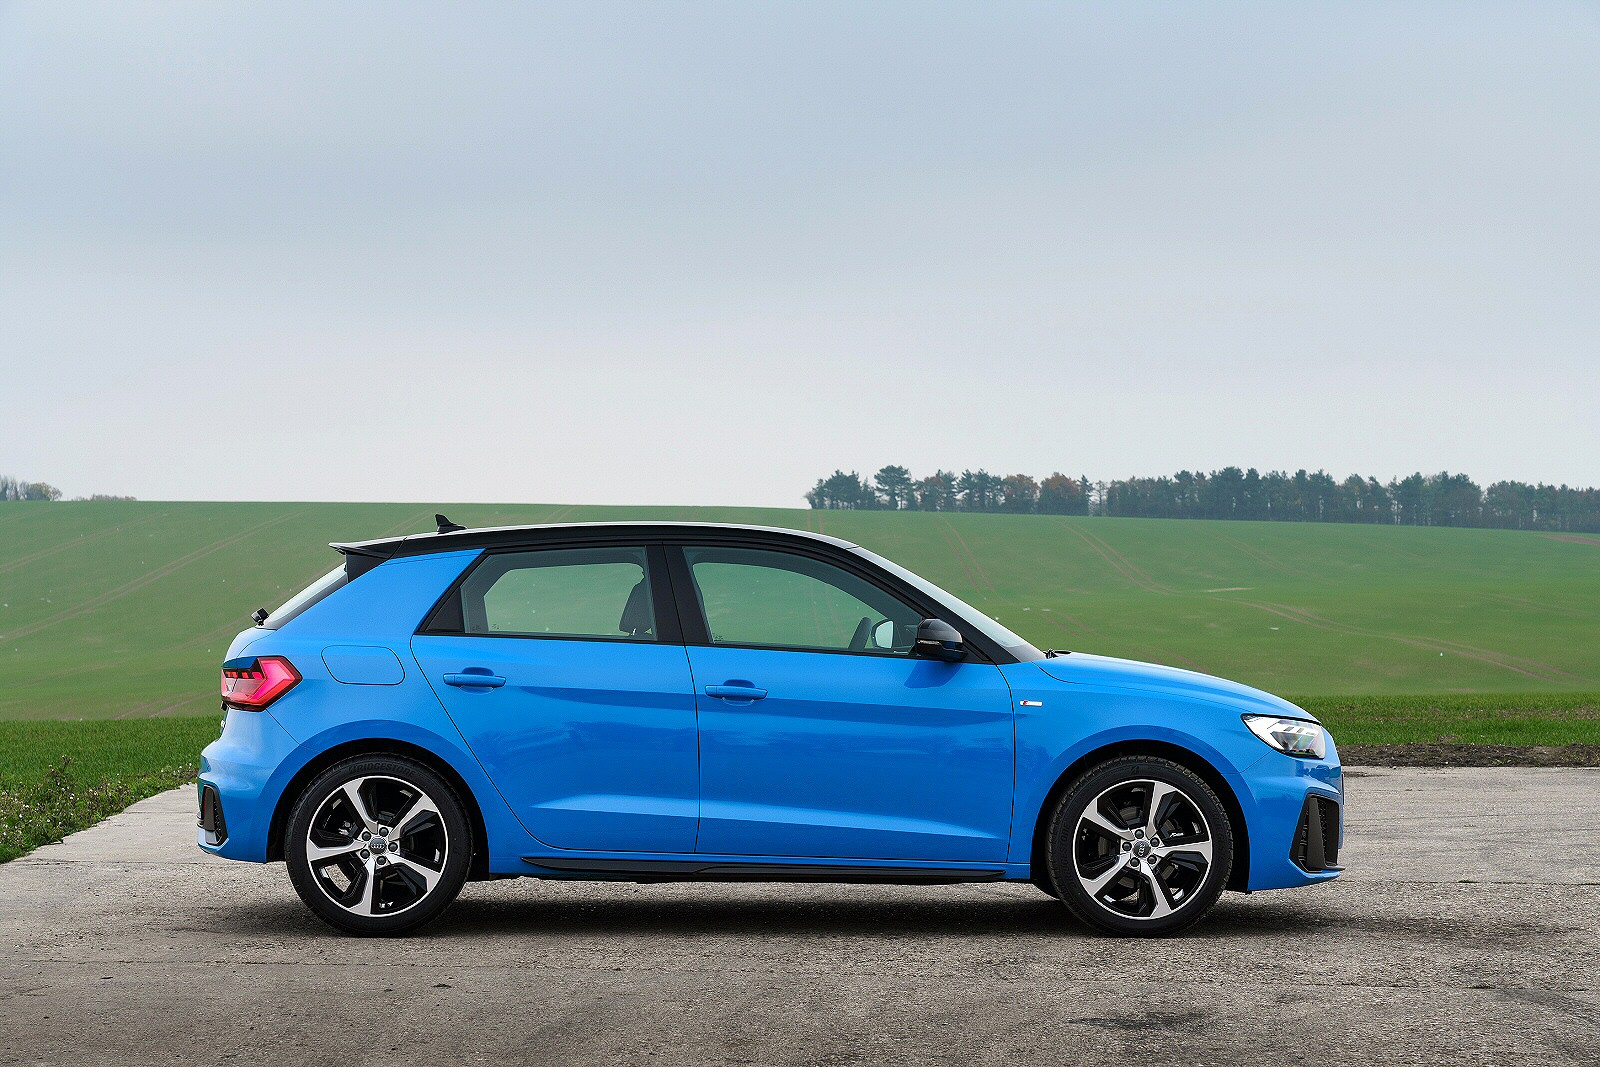 AUDI A1 Leasing & Contract Hire